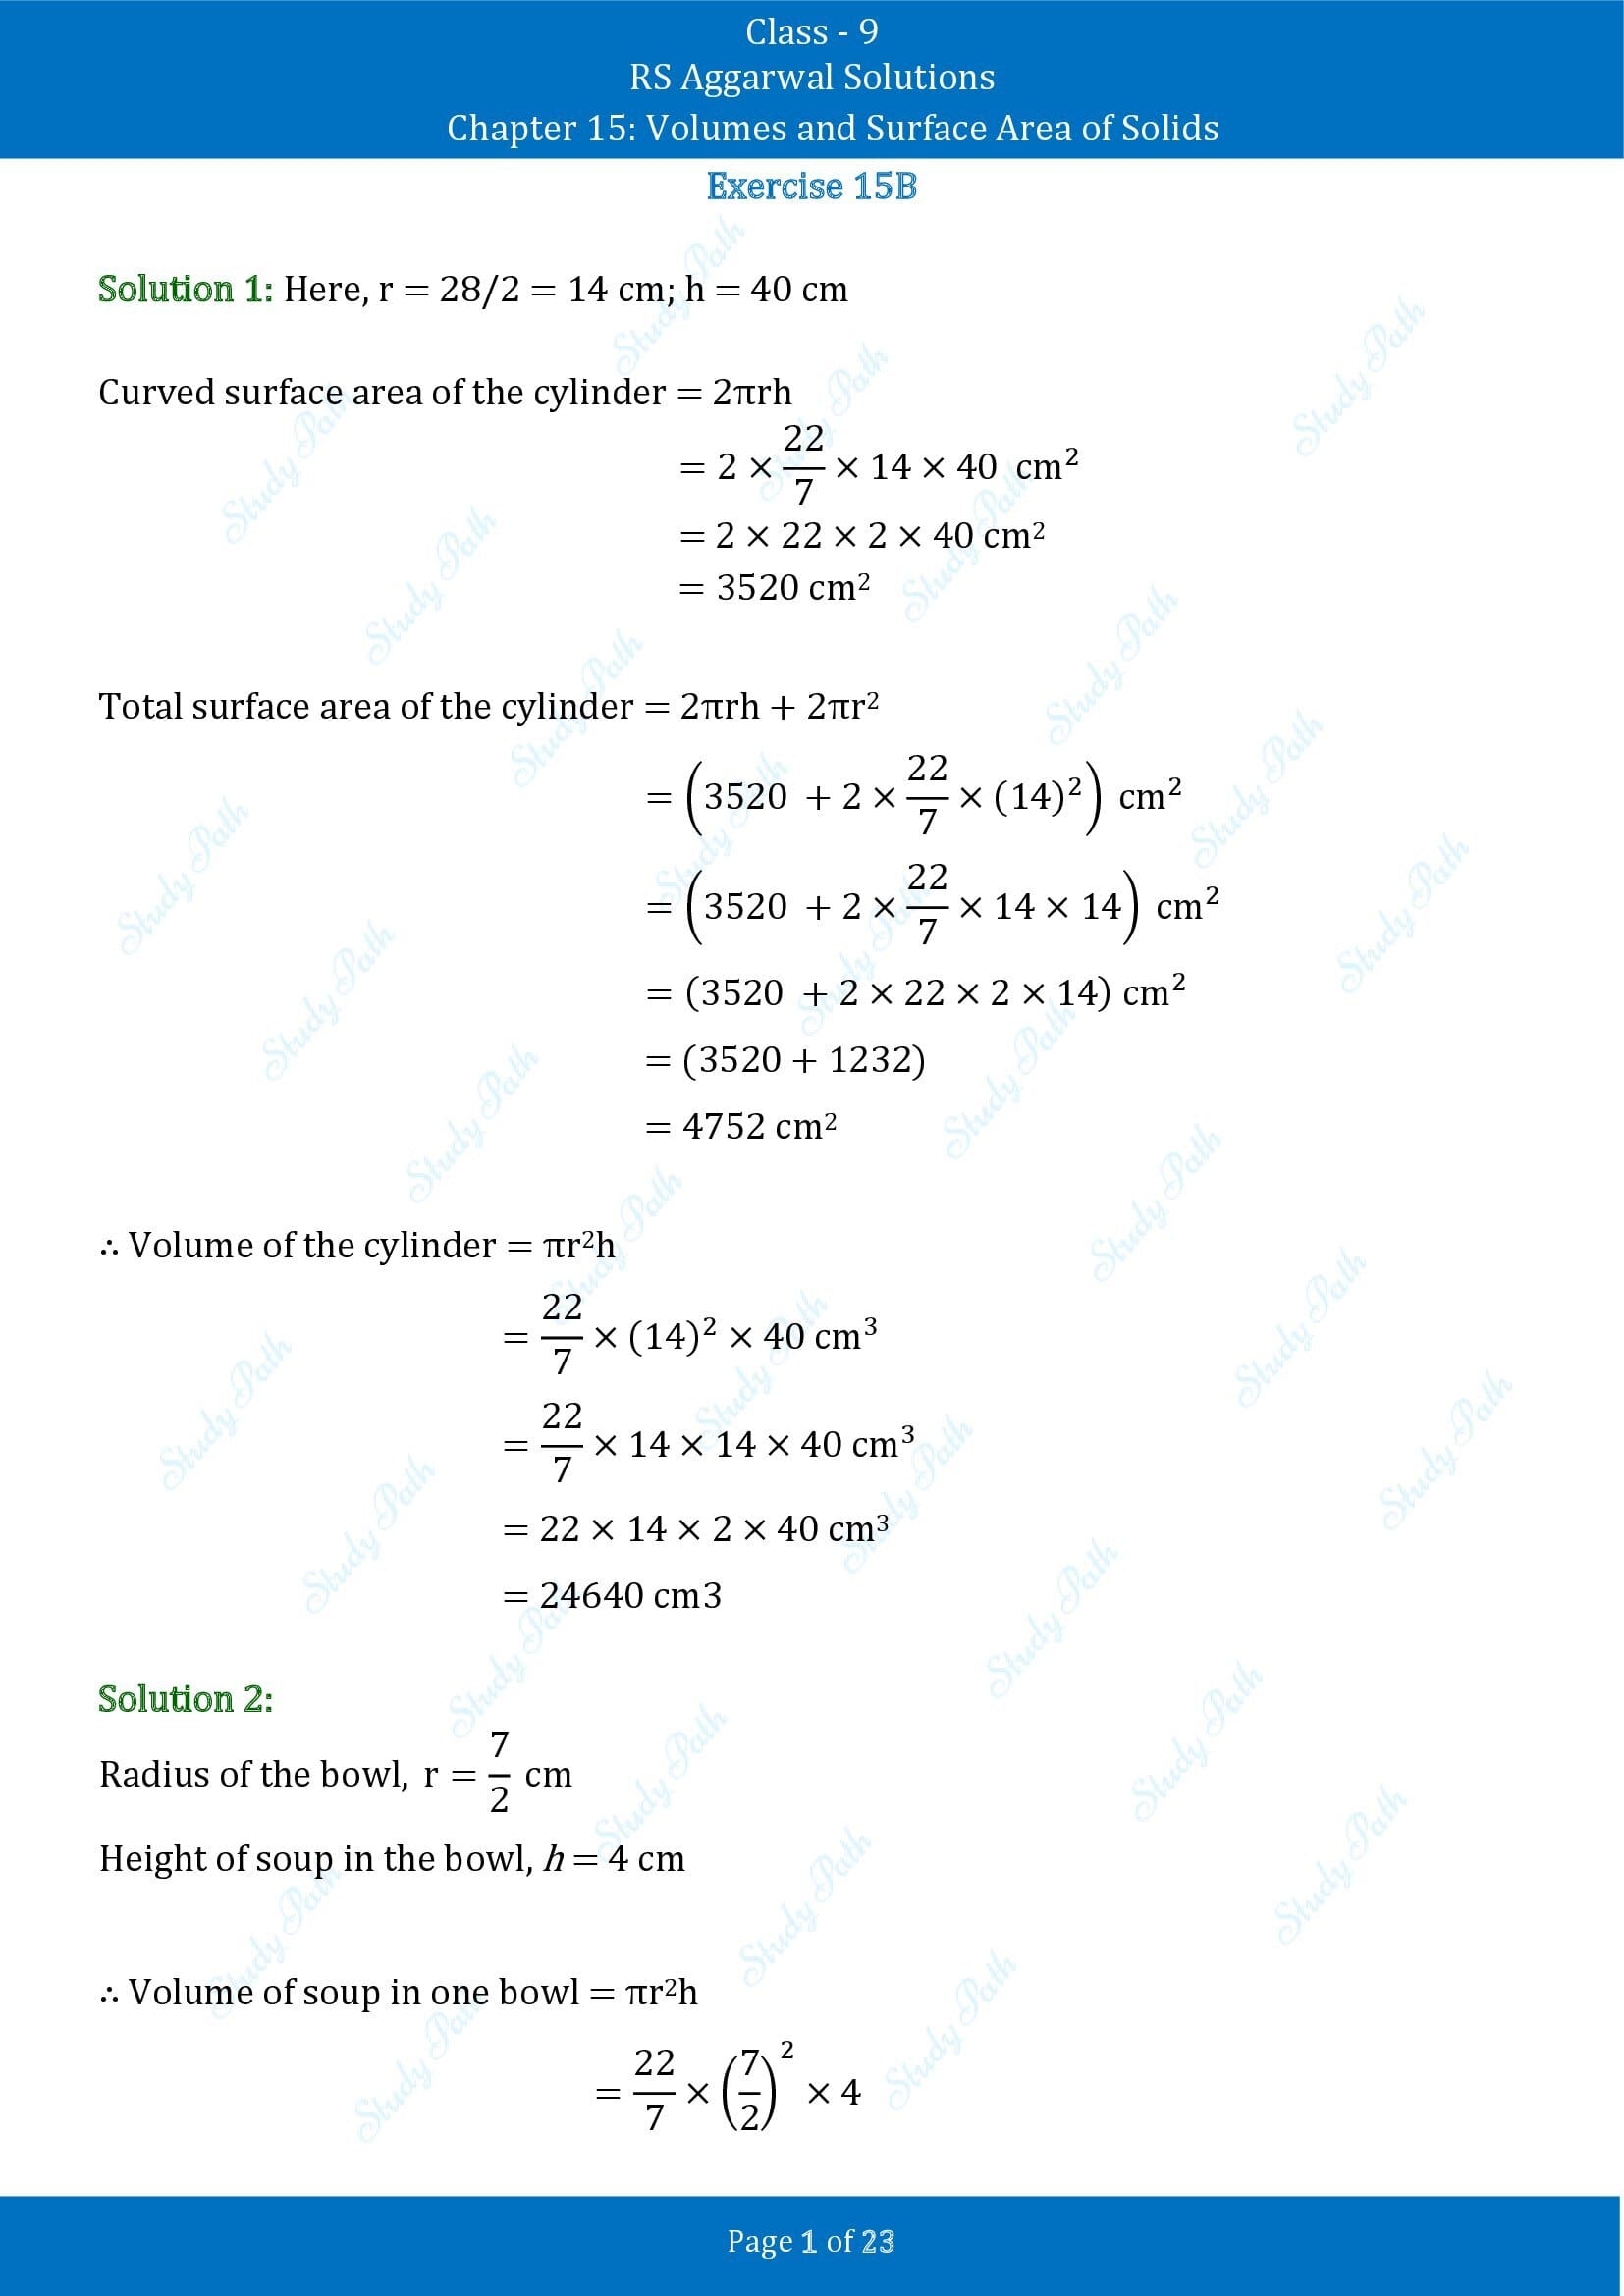 RS Aggarwal Solutions Class 9 Chapter 15 Volumes and Surface Area of Solids Exercise 15B 00001